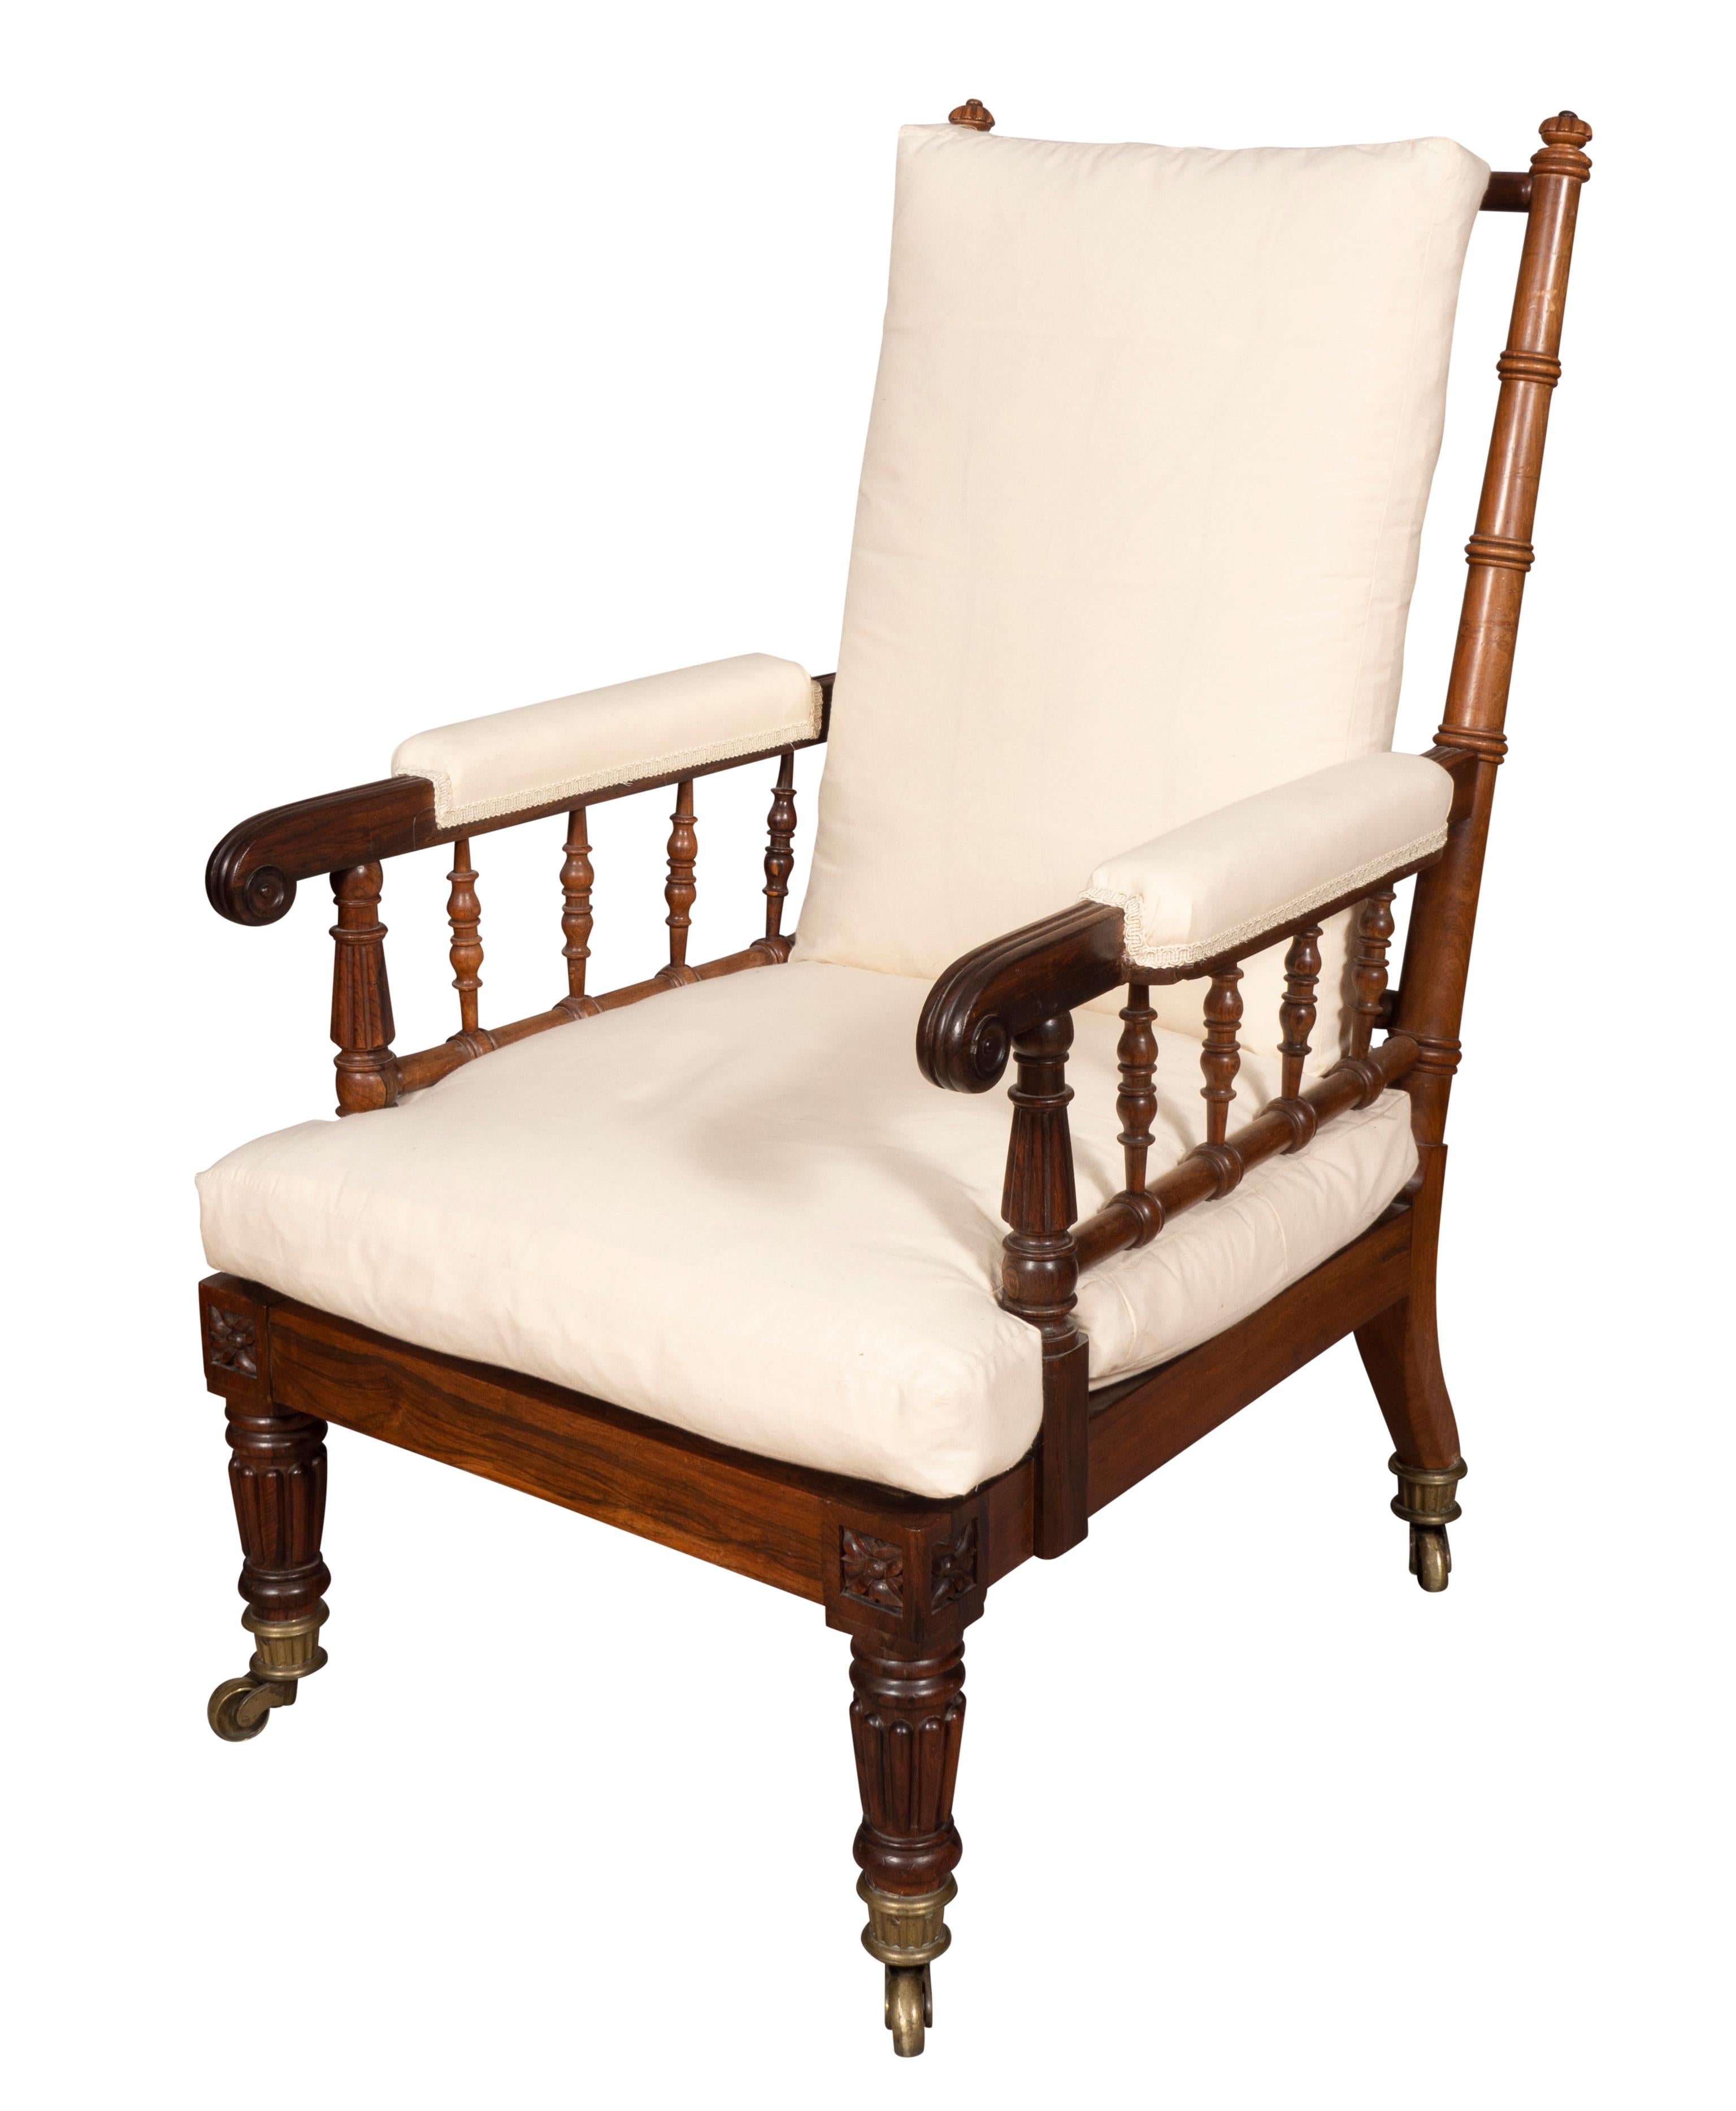 Regency Rosewood Armchair By Gillows In Good Condition For Sale In Essex, MA